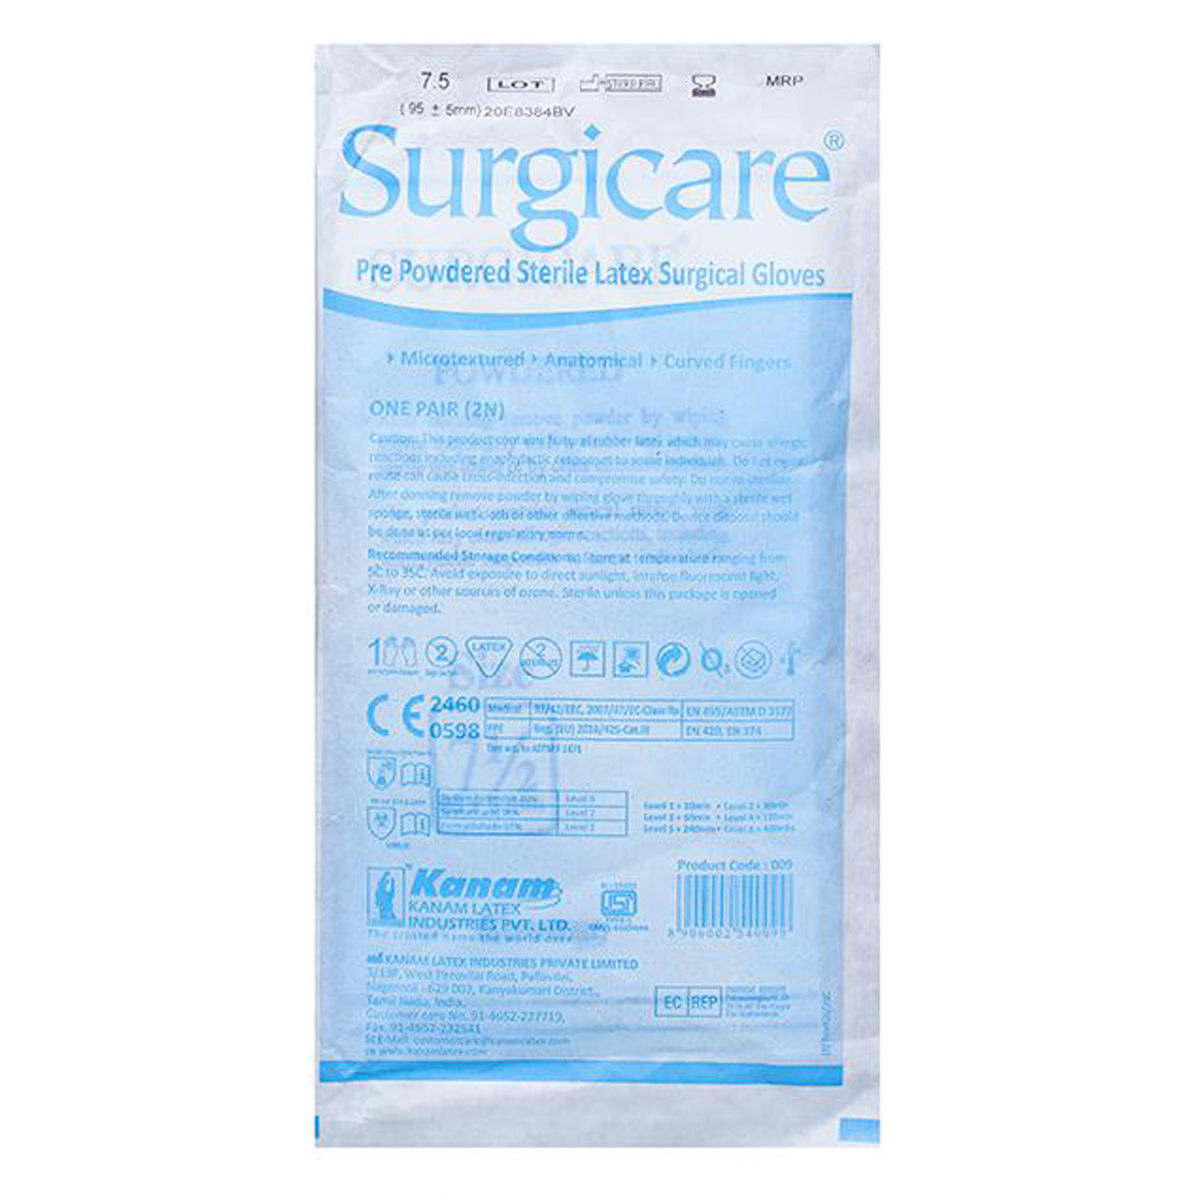 Buy Surgicare Gloves Powder Less 7.5, 1 Count Online